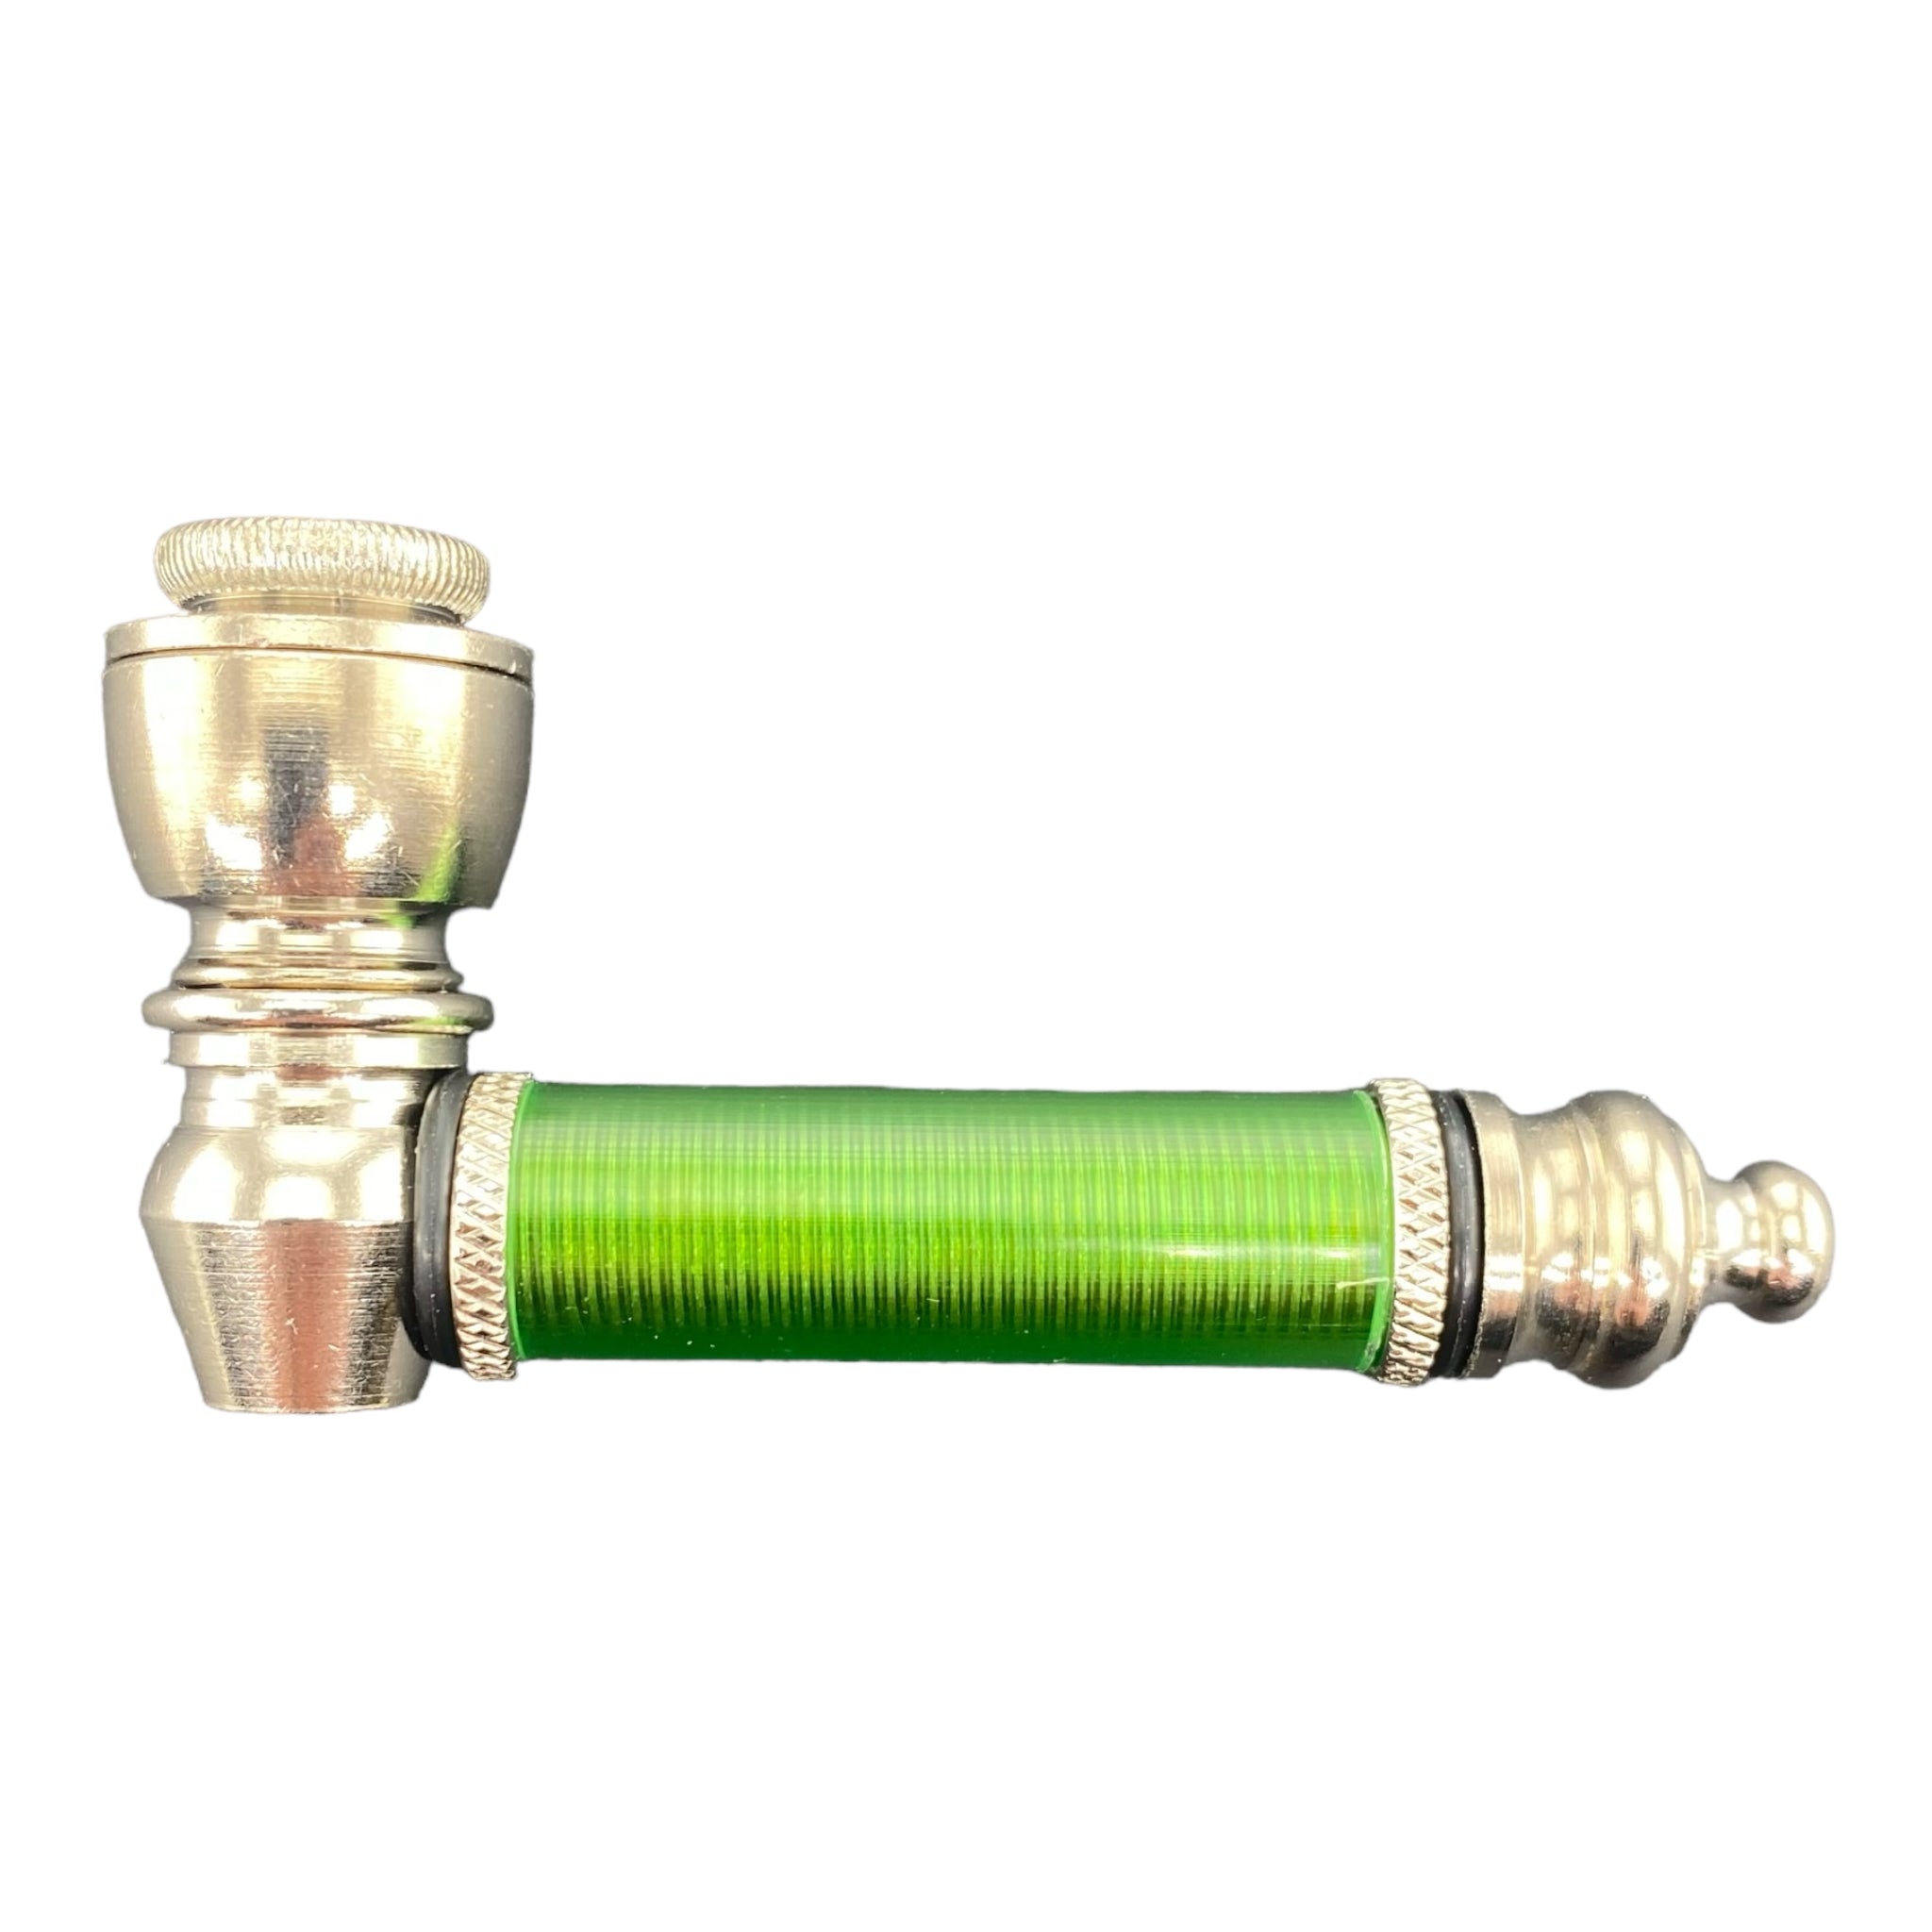 Metal Hand Pipes - Silver Chrome Hand Pipe With Green Plastic Stem